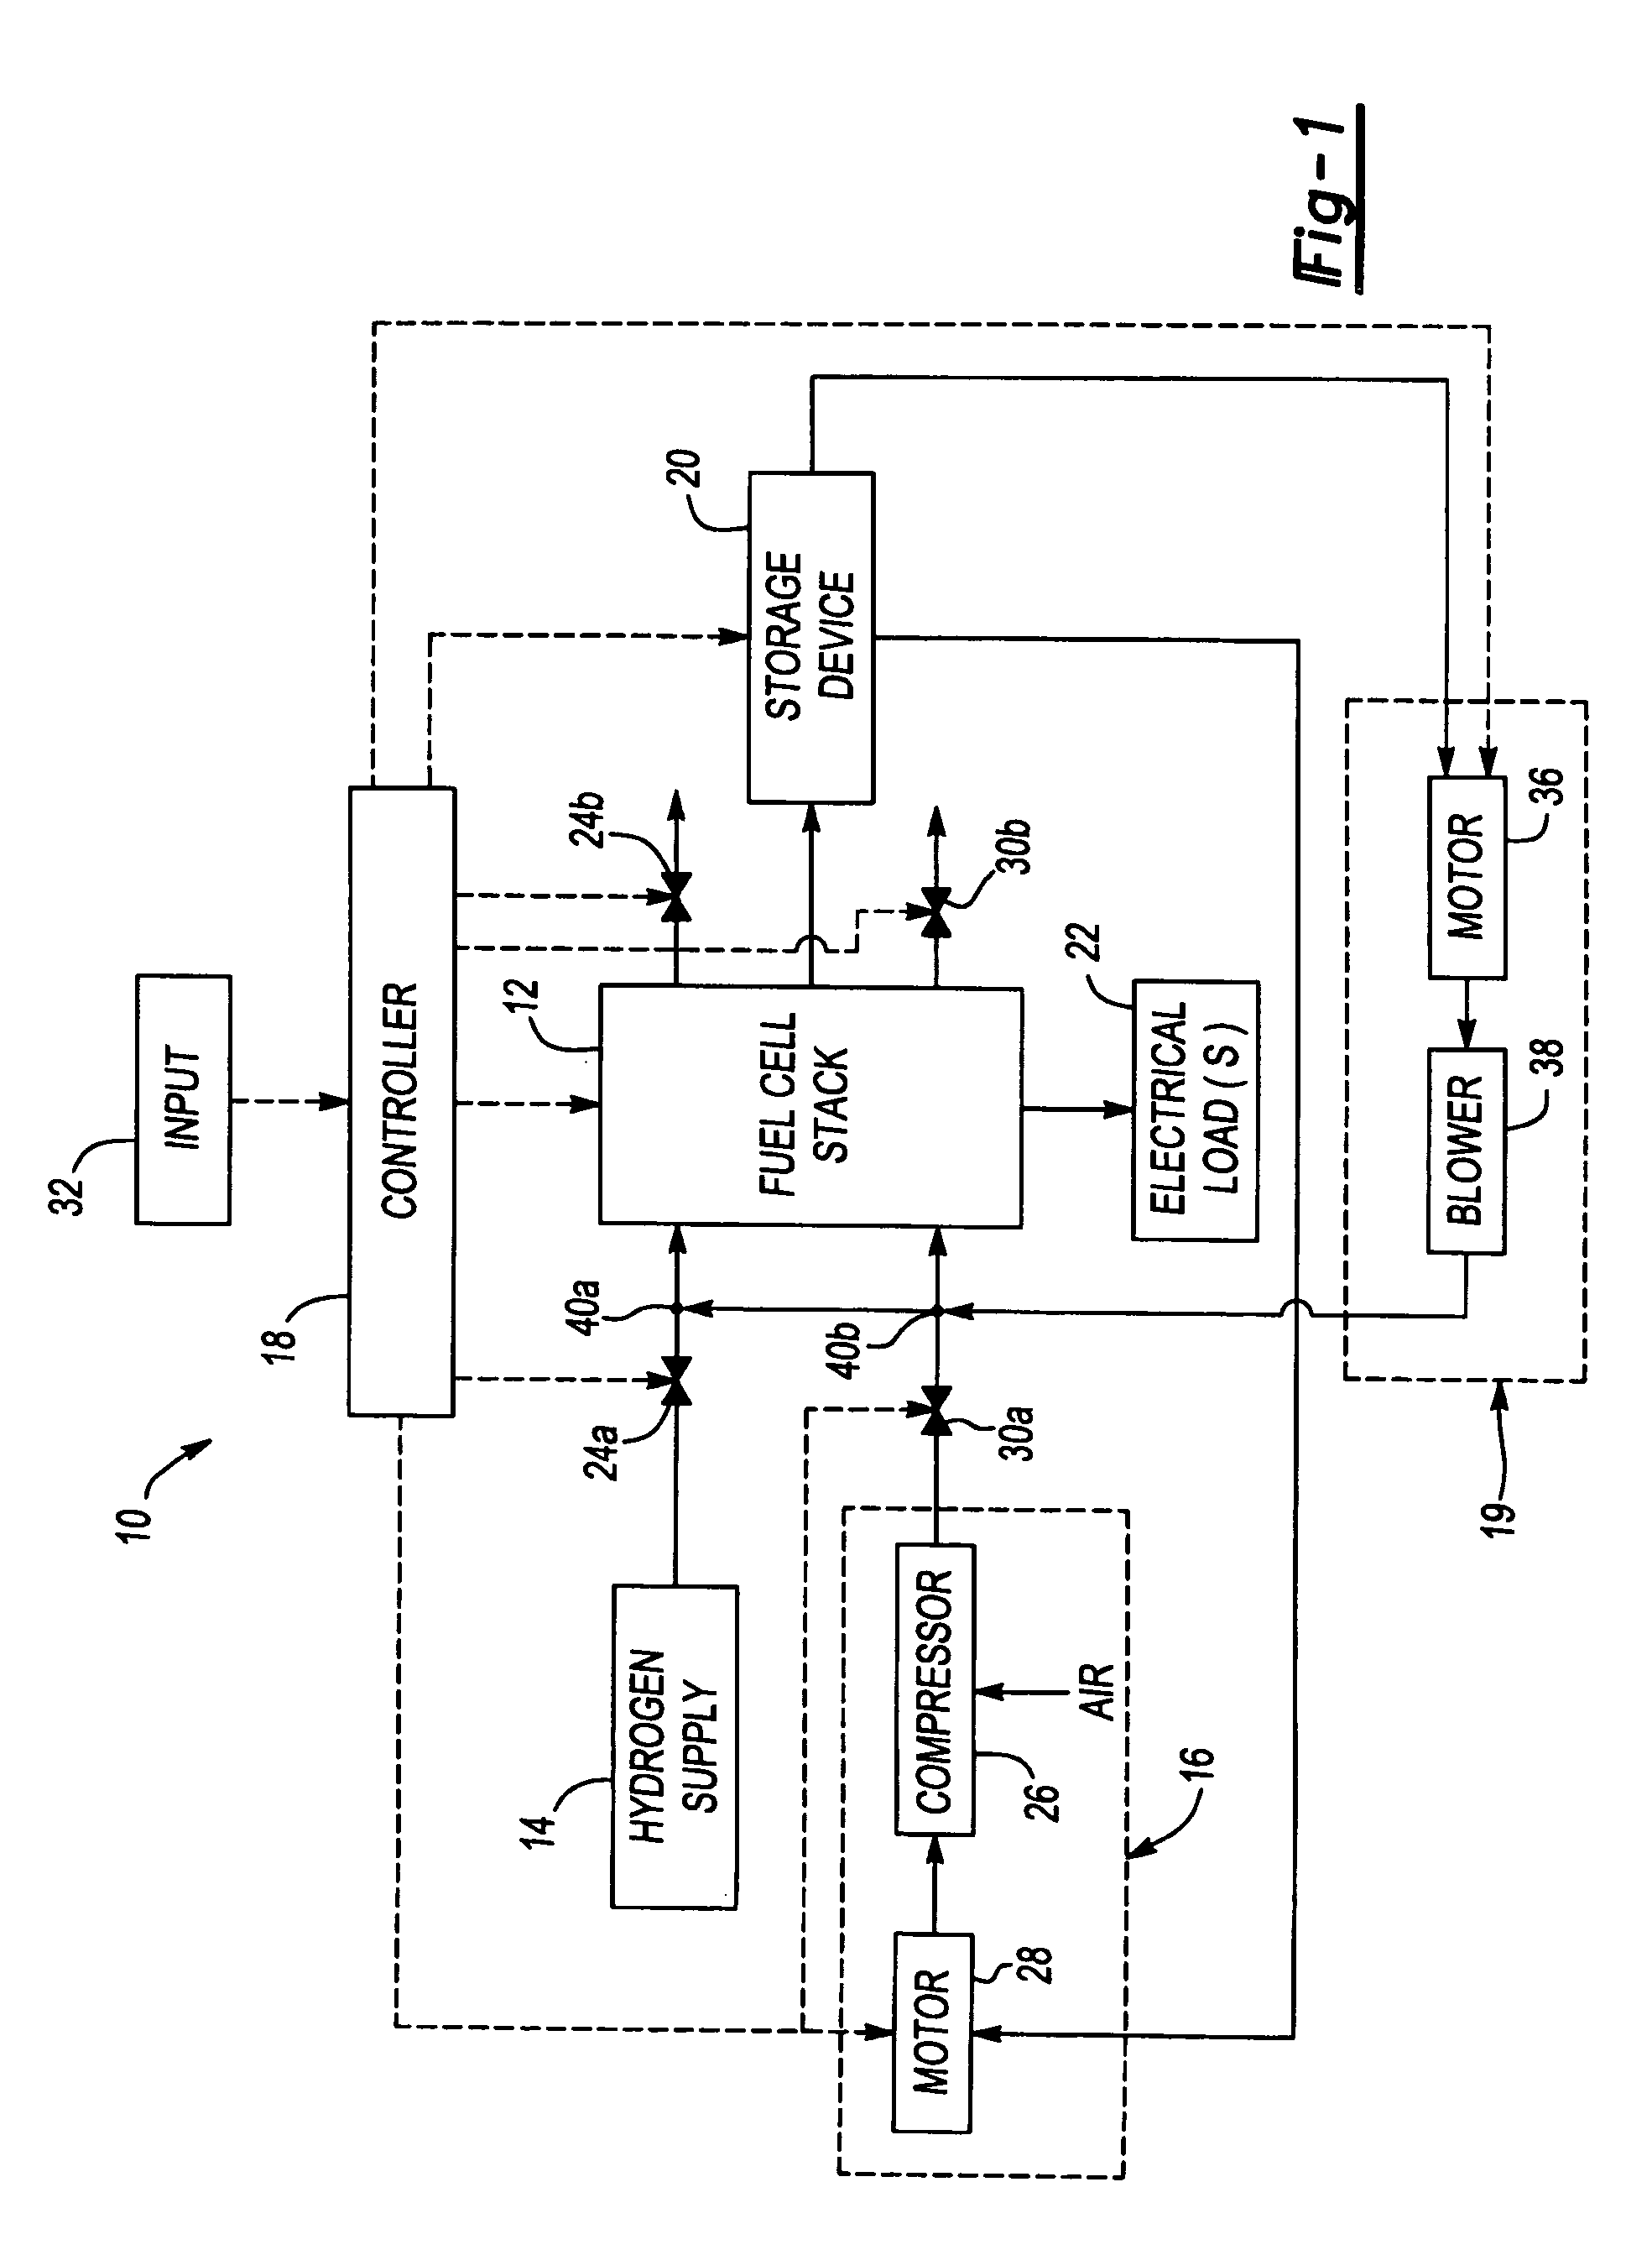 Residual stack shutdown energy storage and usage for a fuel cell power system